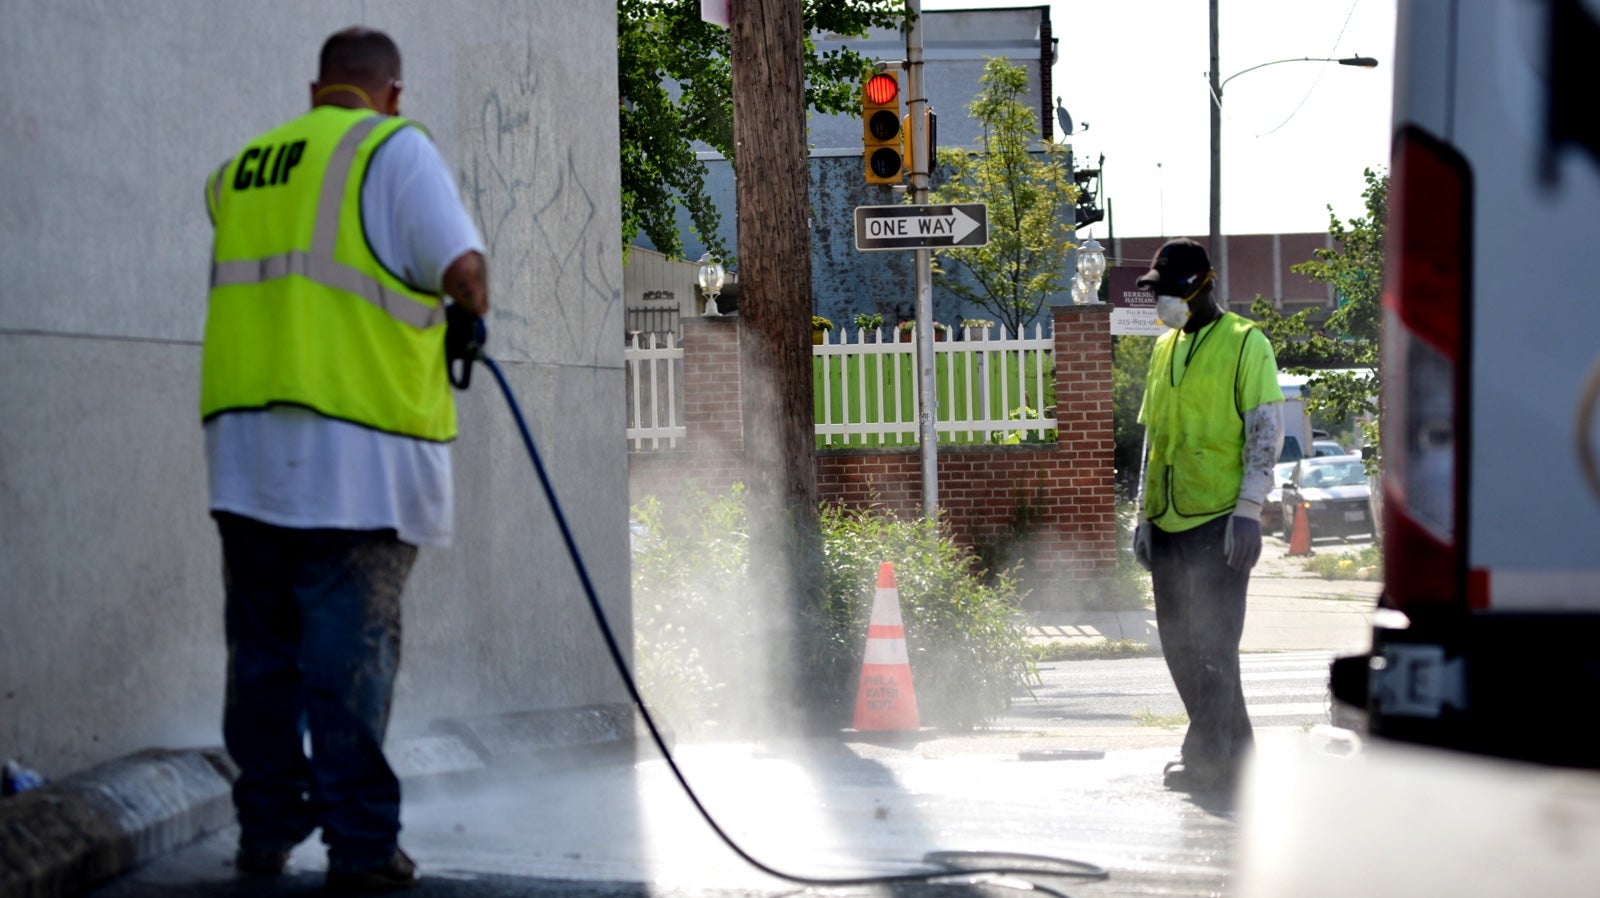 City workers Tim Farnon and Jonathan Hurt remove graffiti from a wall on Washington Avenue in Philadelphia. (Bastiaan Slabbers for NewsWorks)